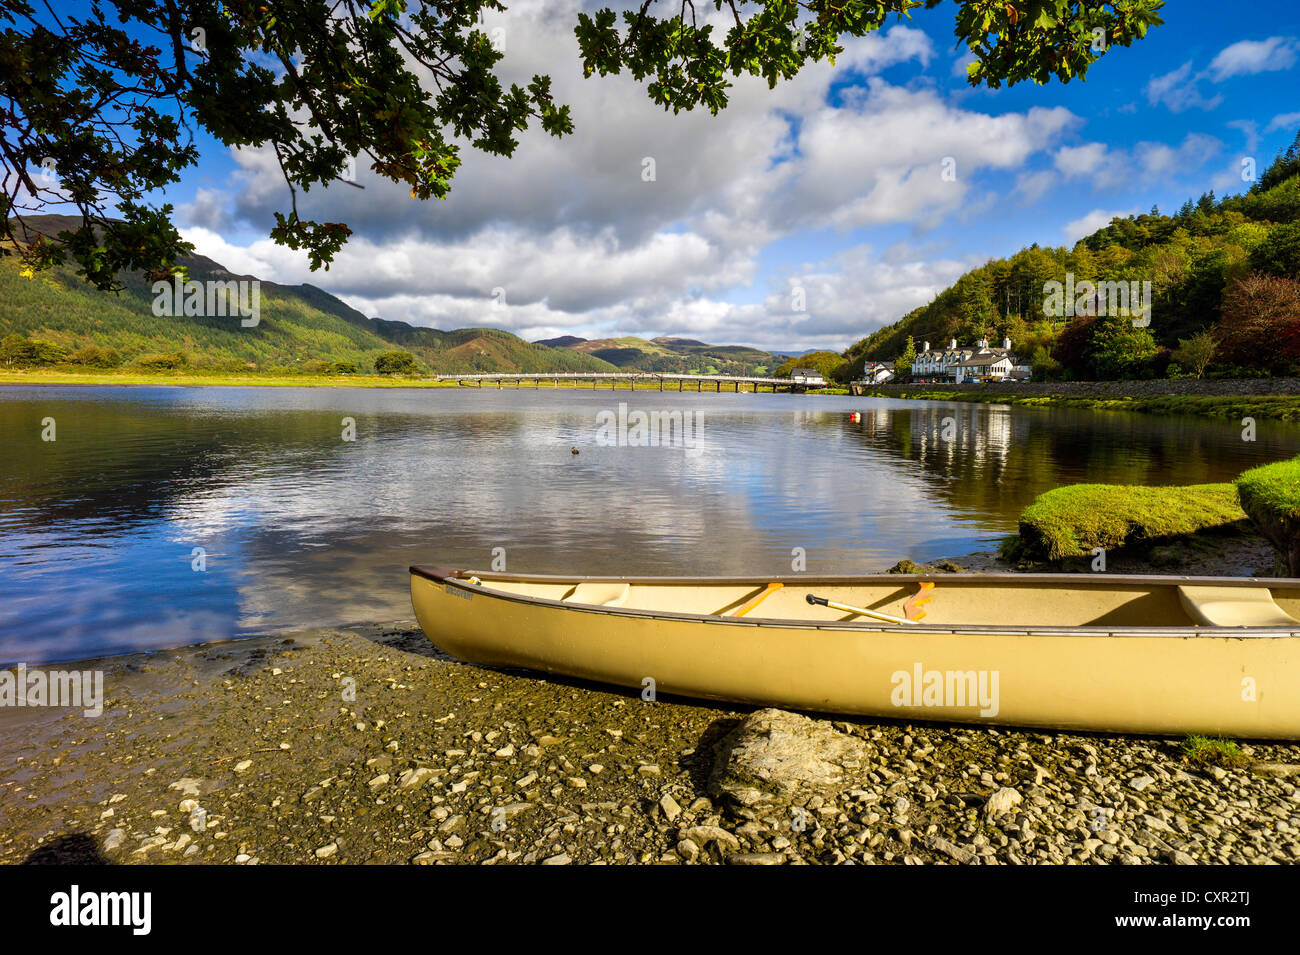 A yellow canoe in the foreground of the river mawddach with reflected blue sky, tree covered hills, white bridge in background Stock Photo